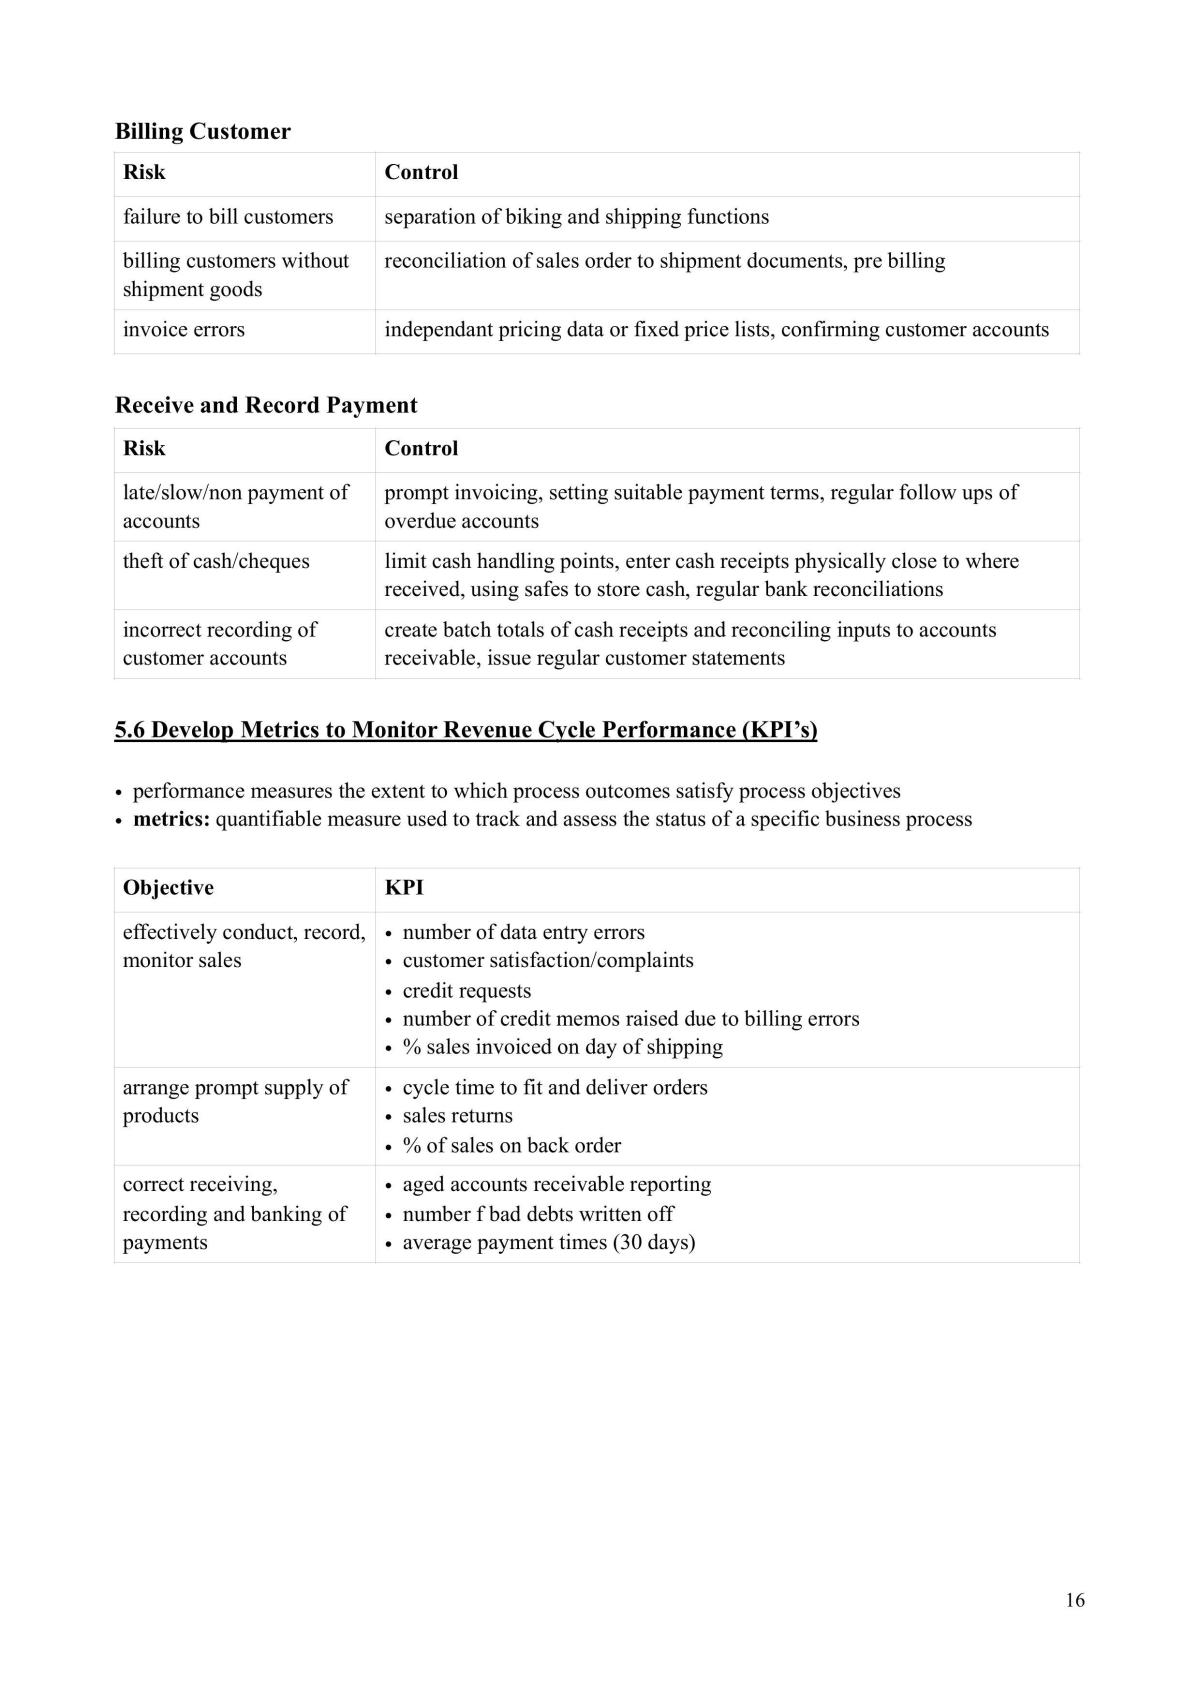 Information Systems and Business Processes Notes - Page 16